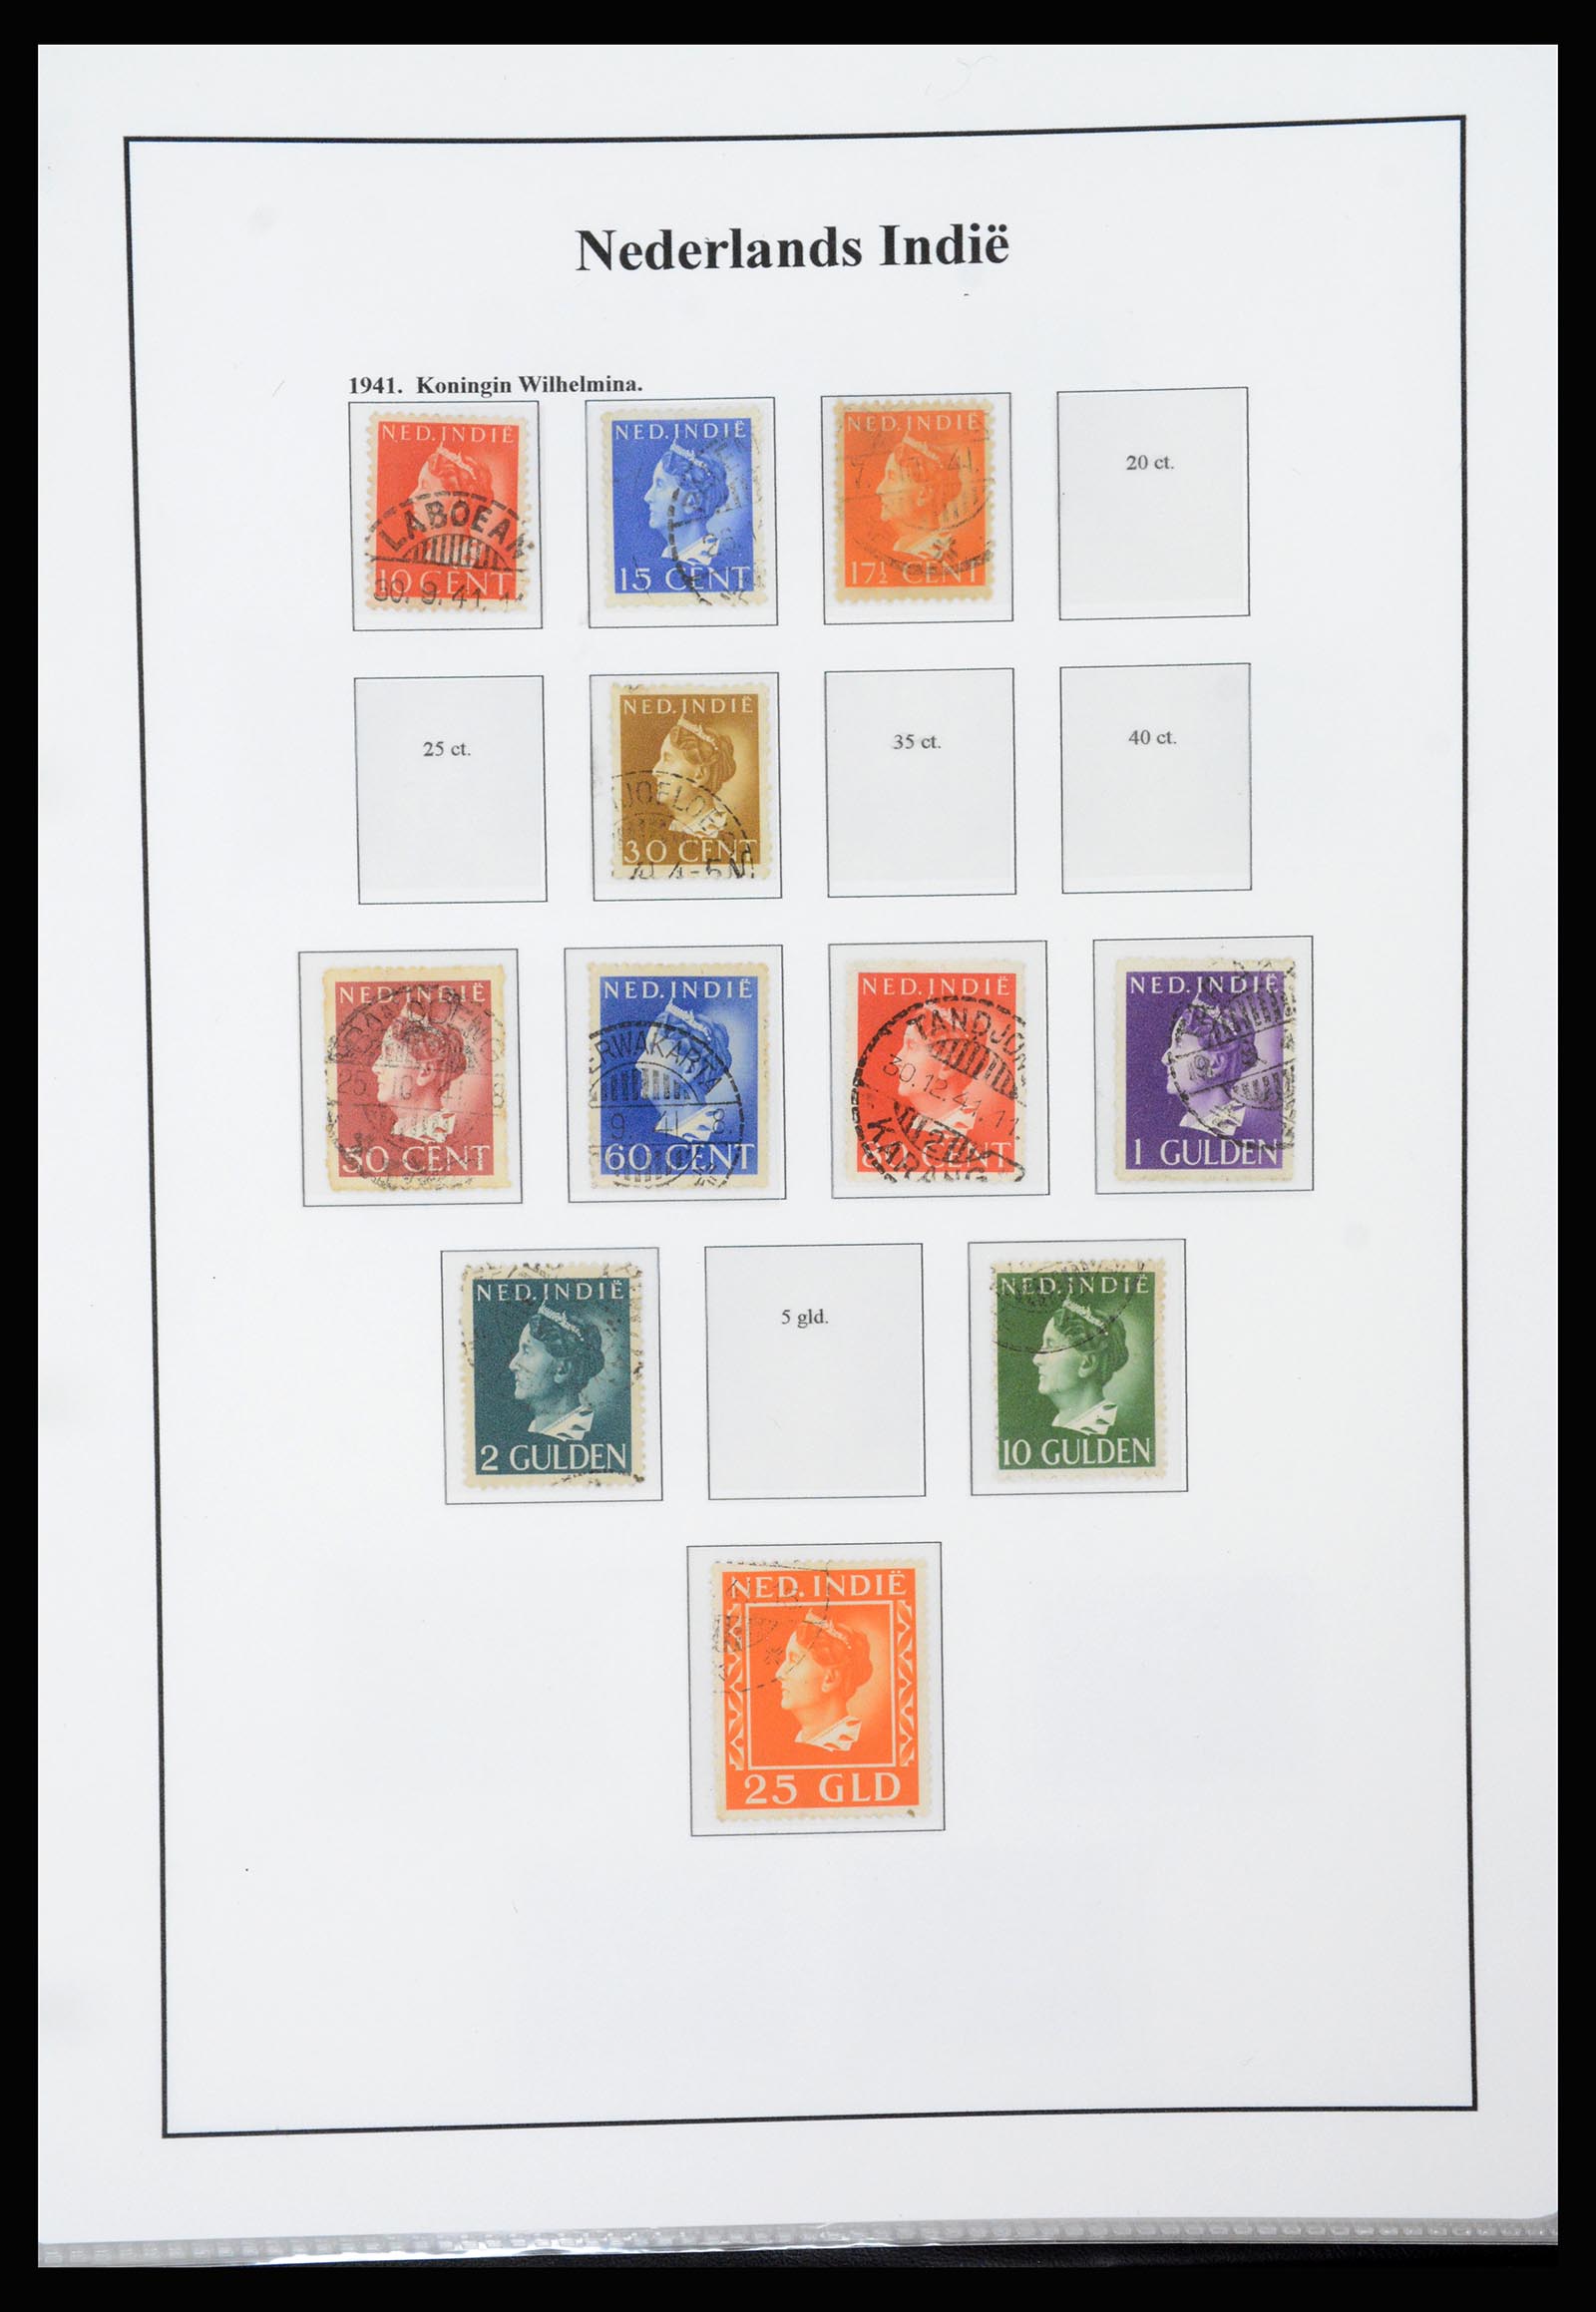 37247 023 - Stamp collection 37247 Dutch east Indies 1864-1949.